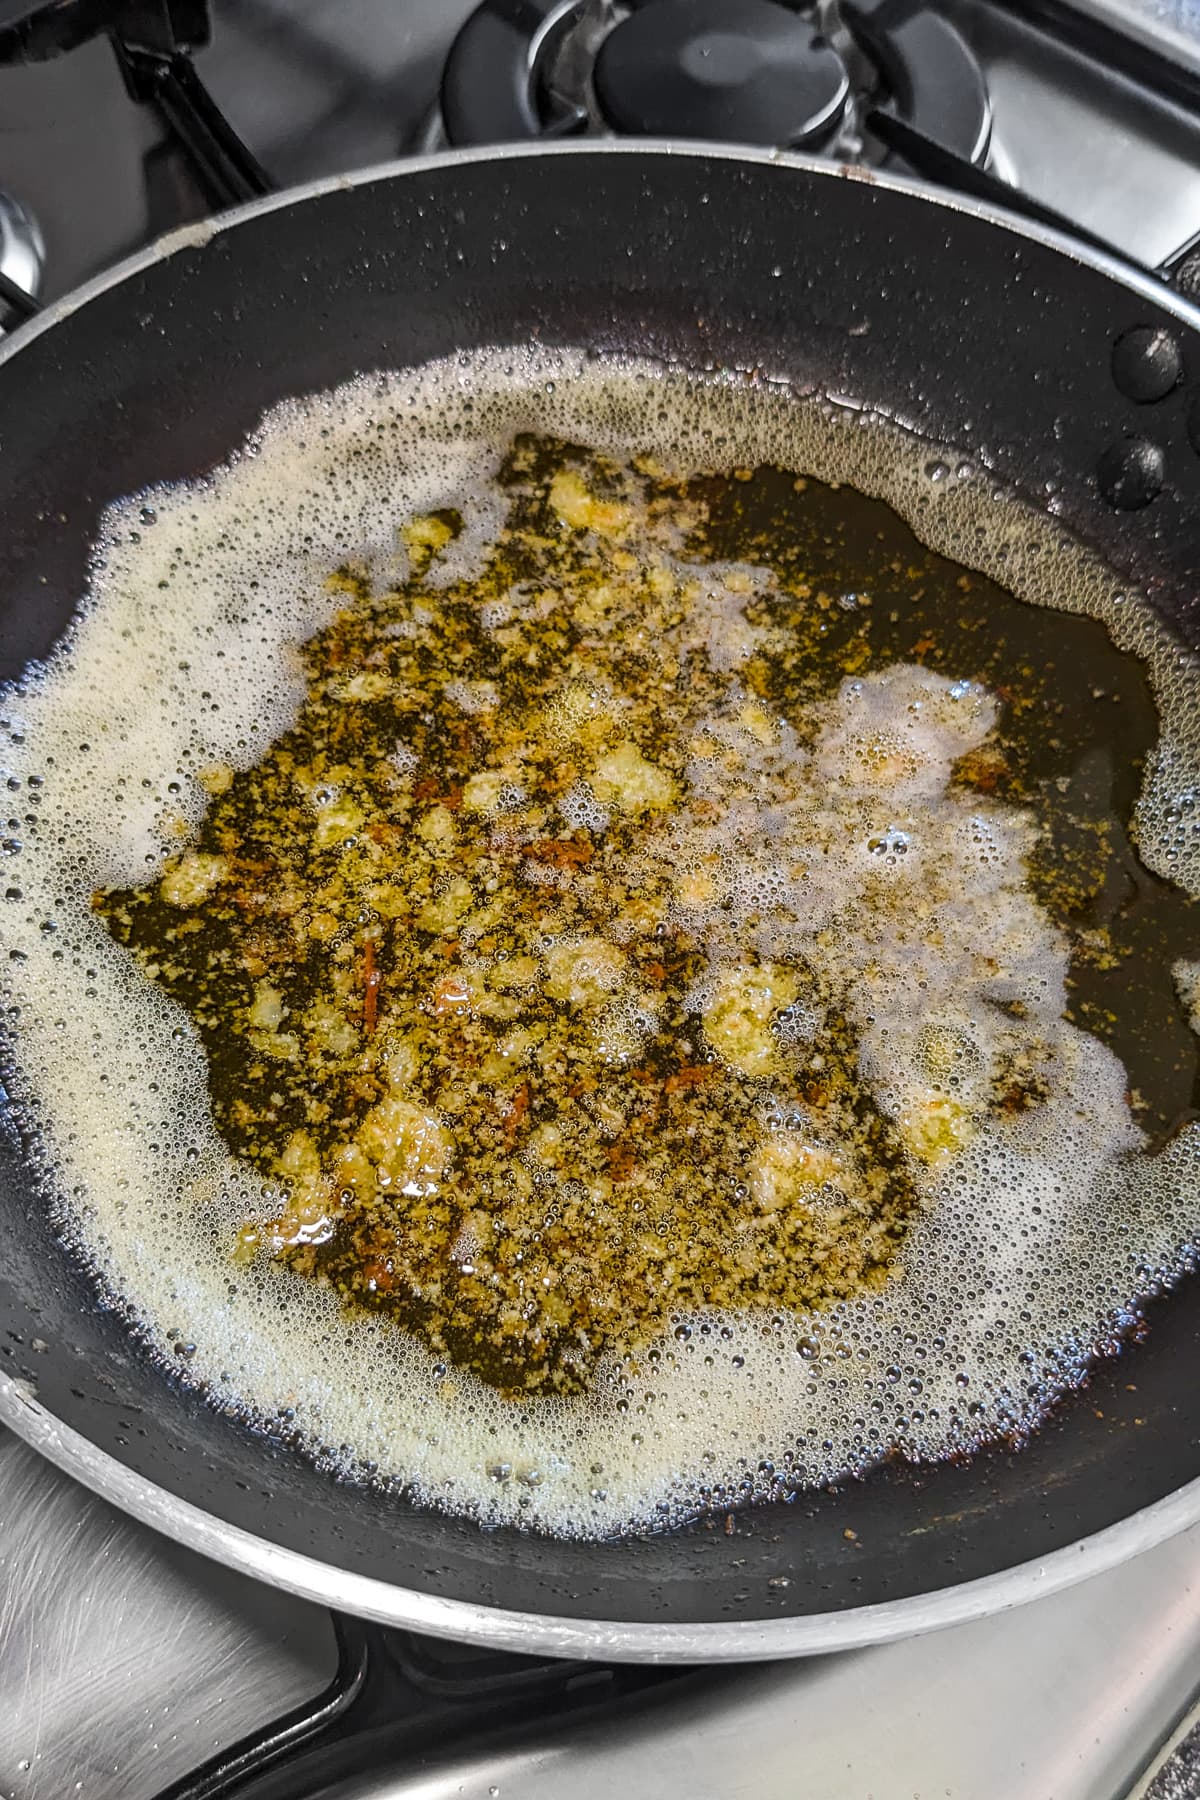 Frying pan with meuniere sauce on the stove.